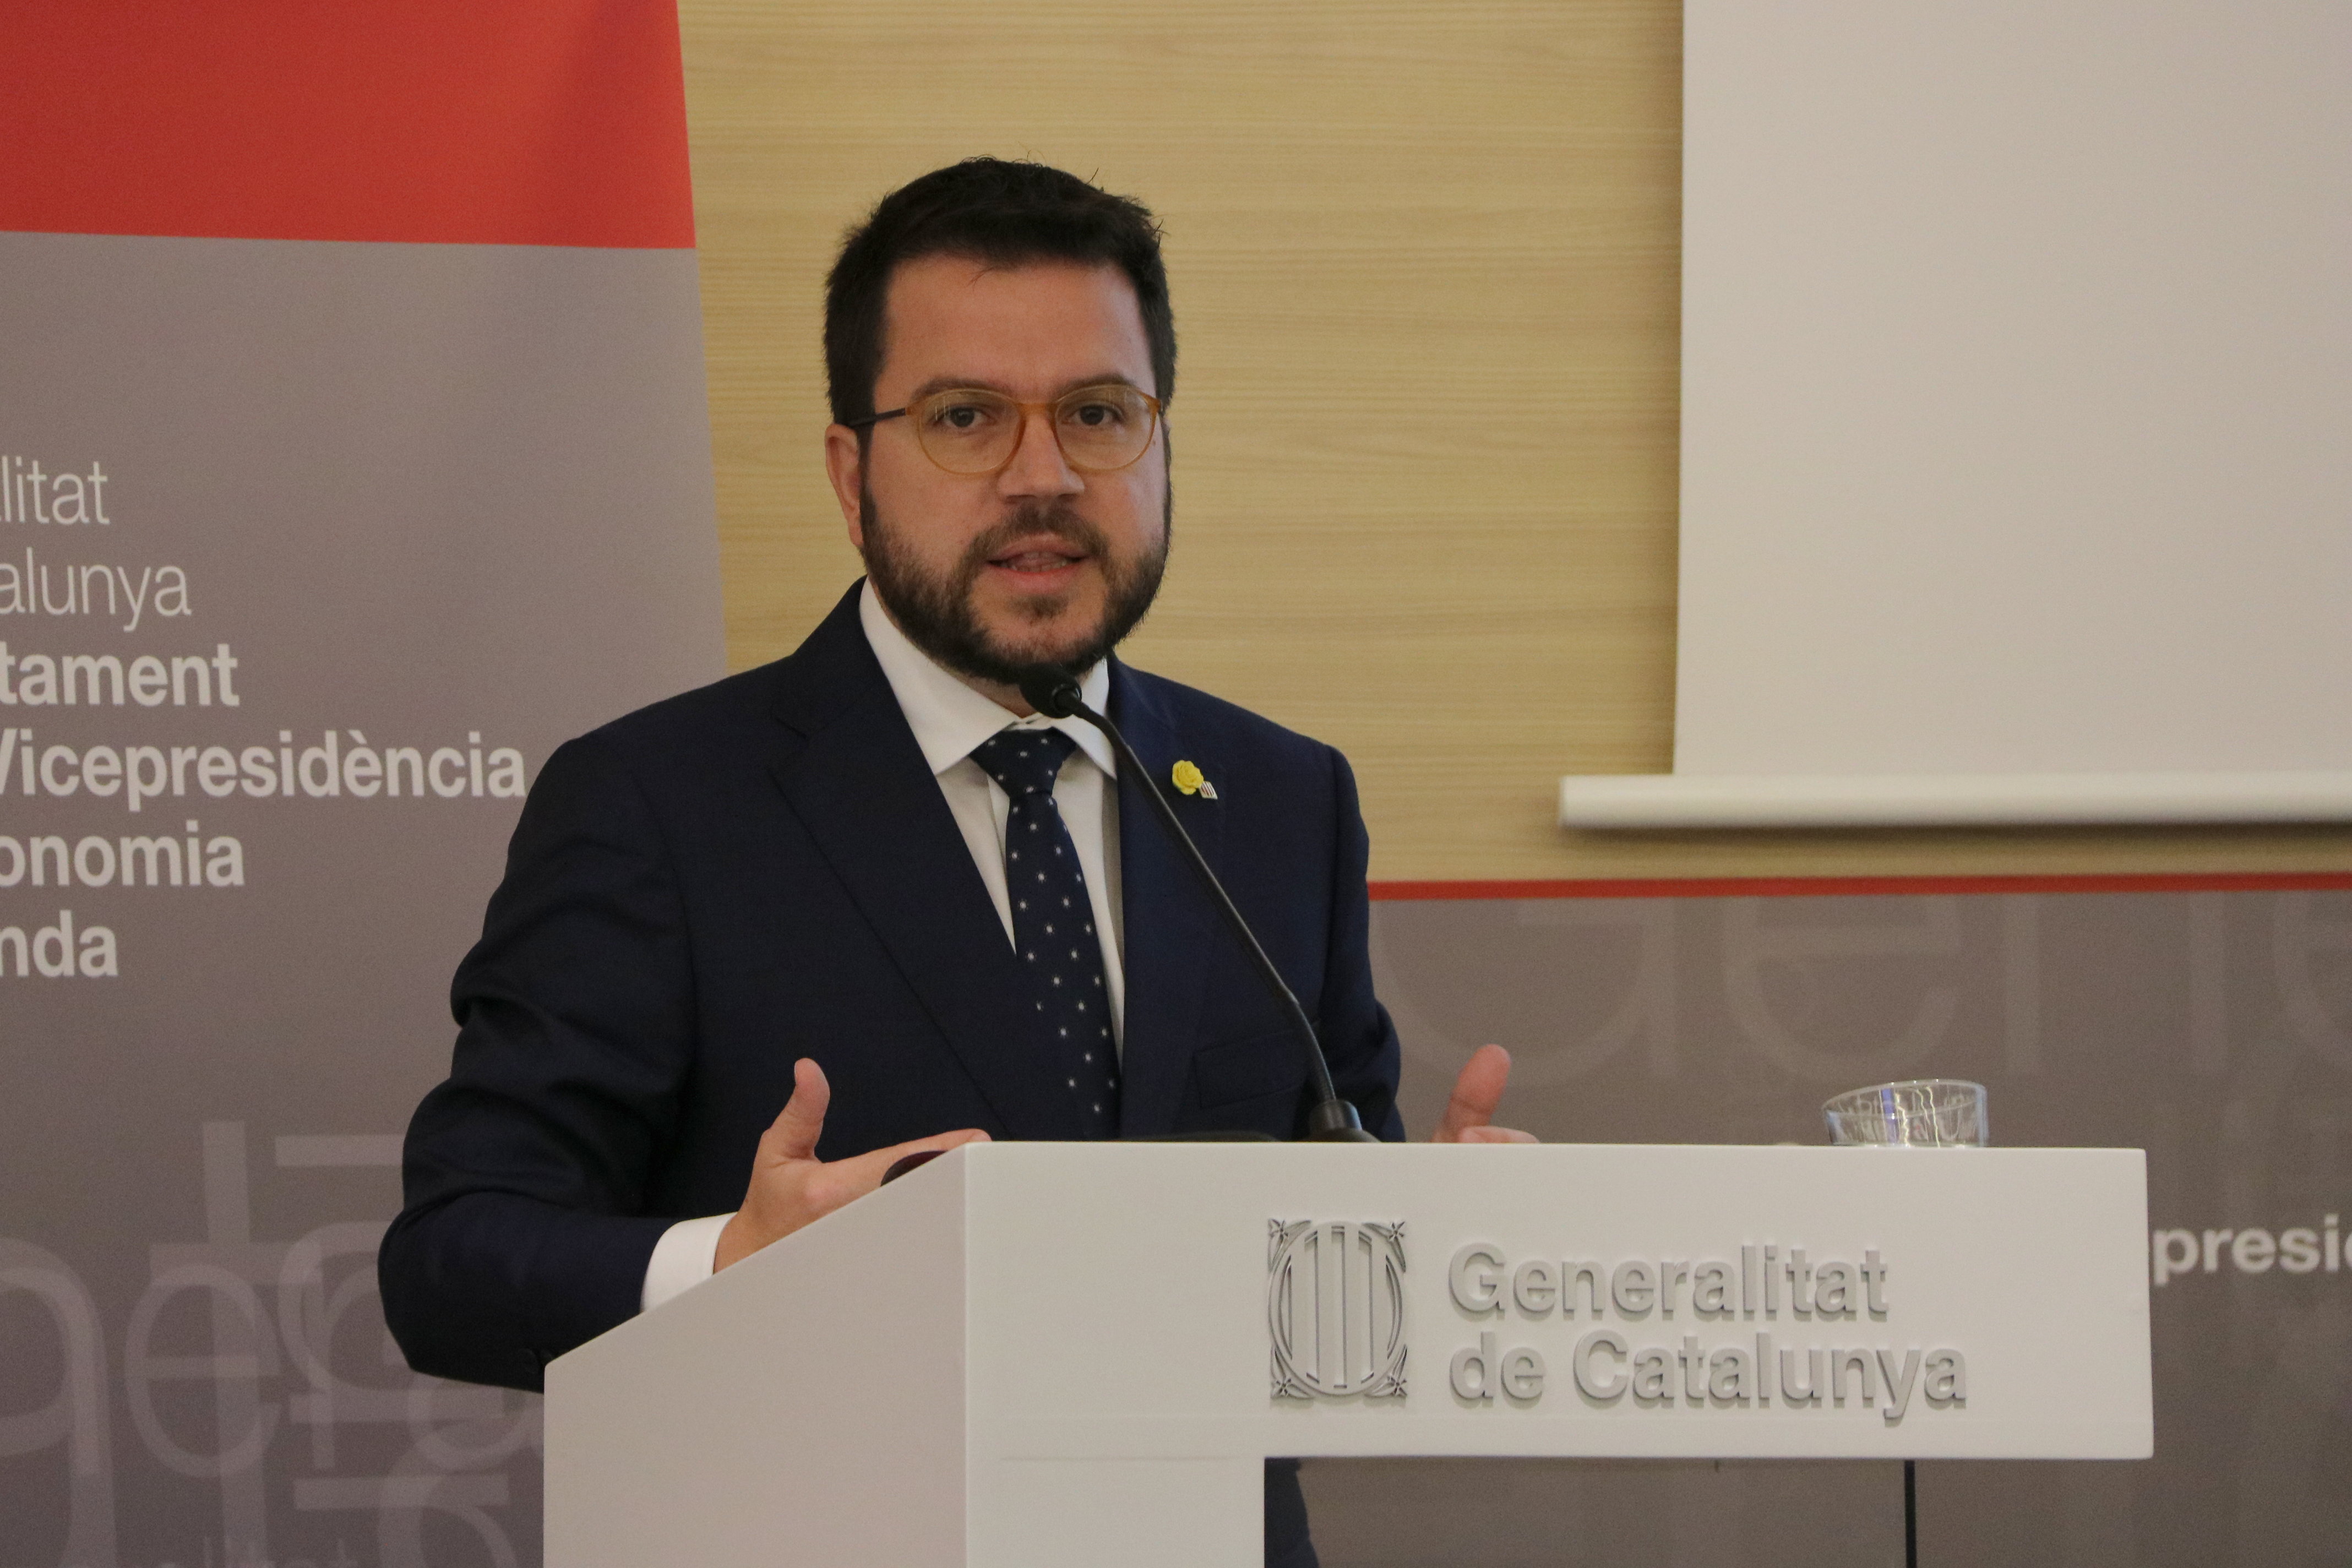 Pere Aragonès presenting an overview of Catalonia’s economy on July 18, 2019 (Andrea Zamorano/ACN)